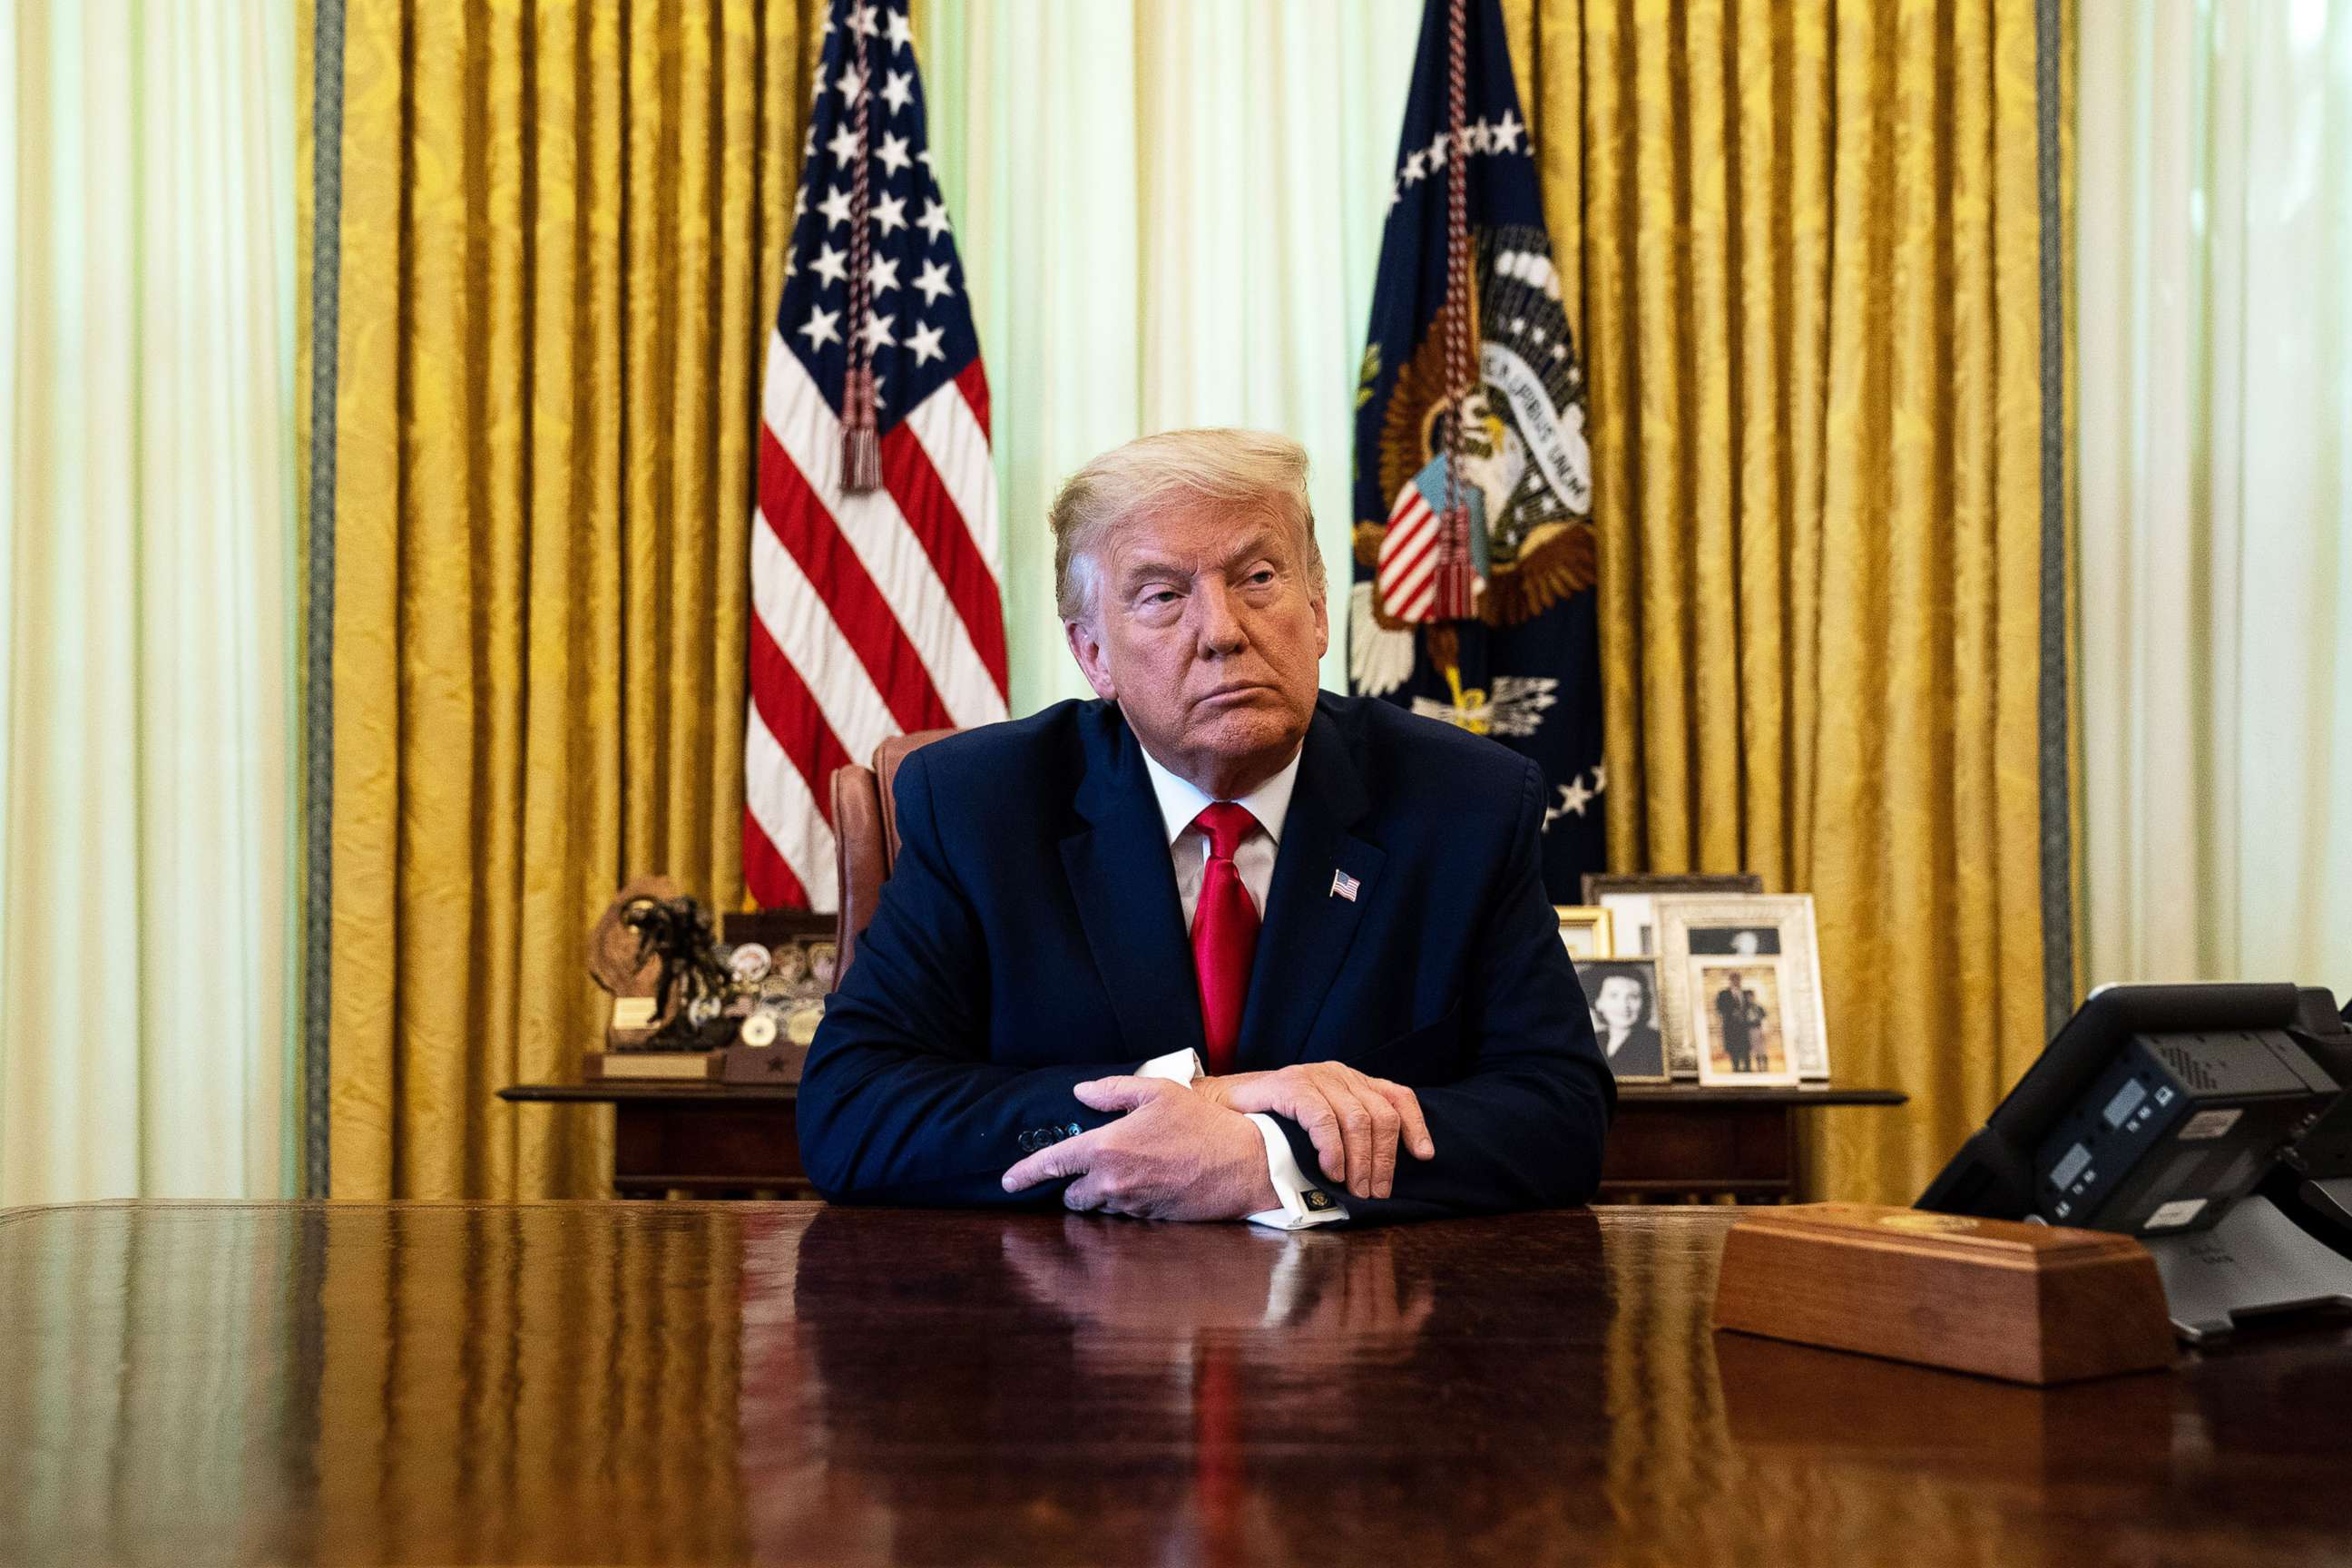 PHOTO: President Donald Trump listens during an event in the Oval Office of the White House, Aug. 28, 2020 in Washington, DC.